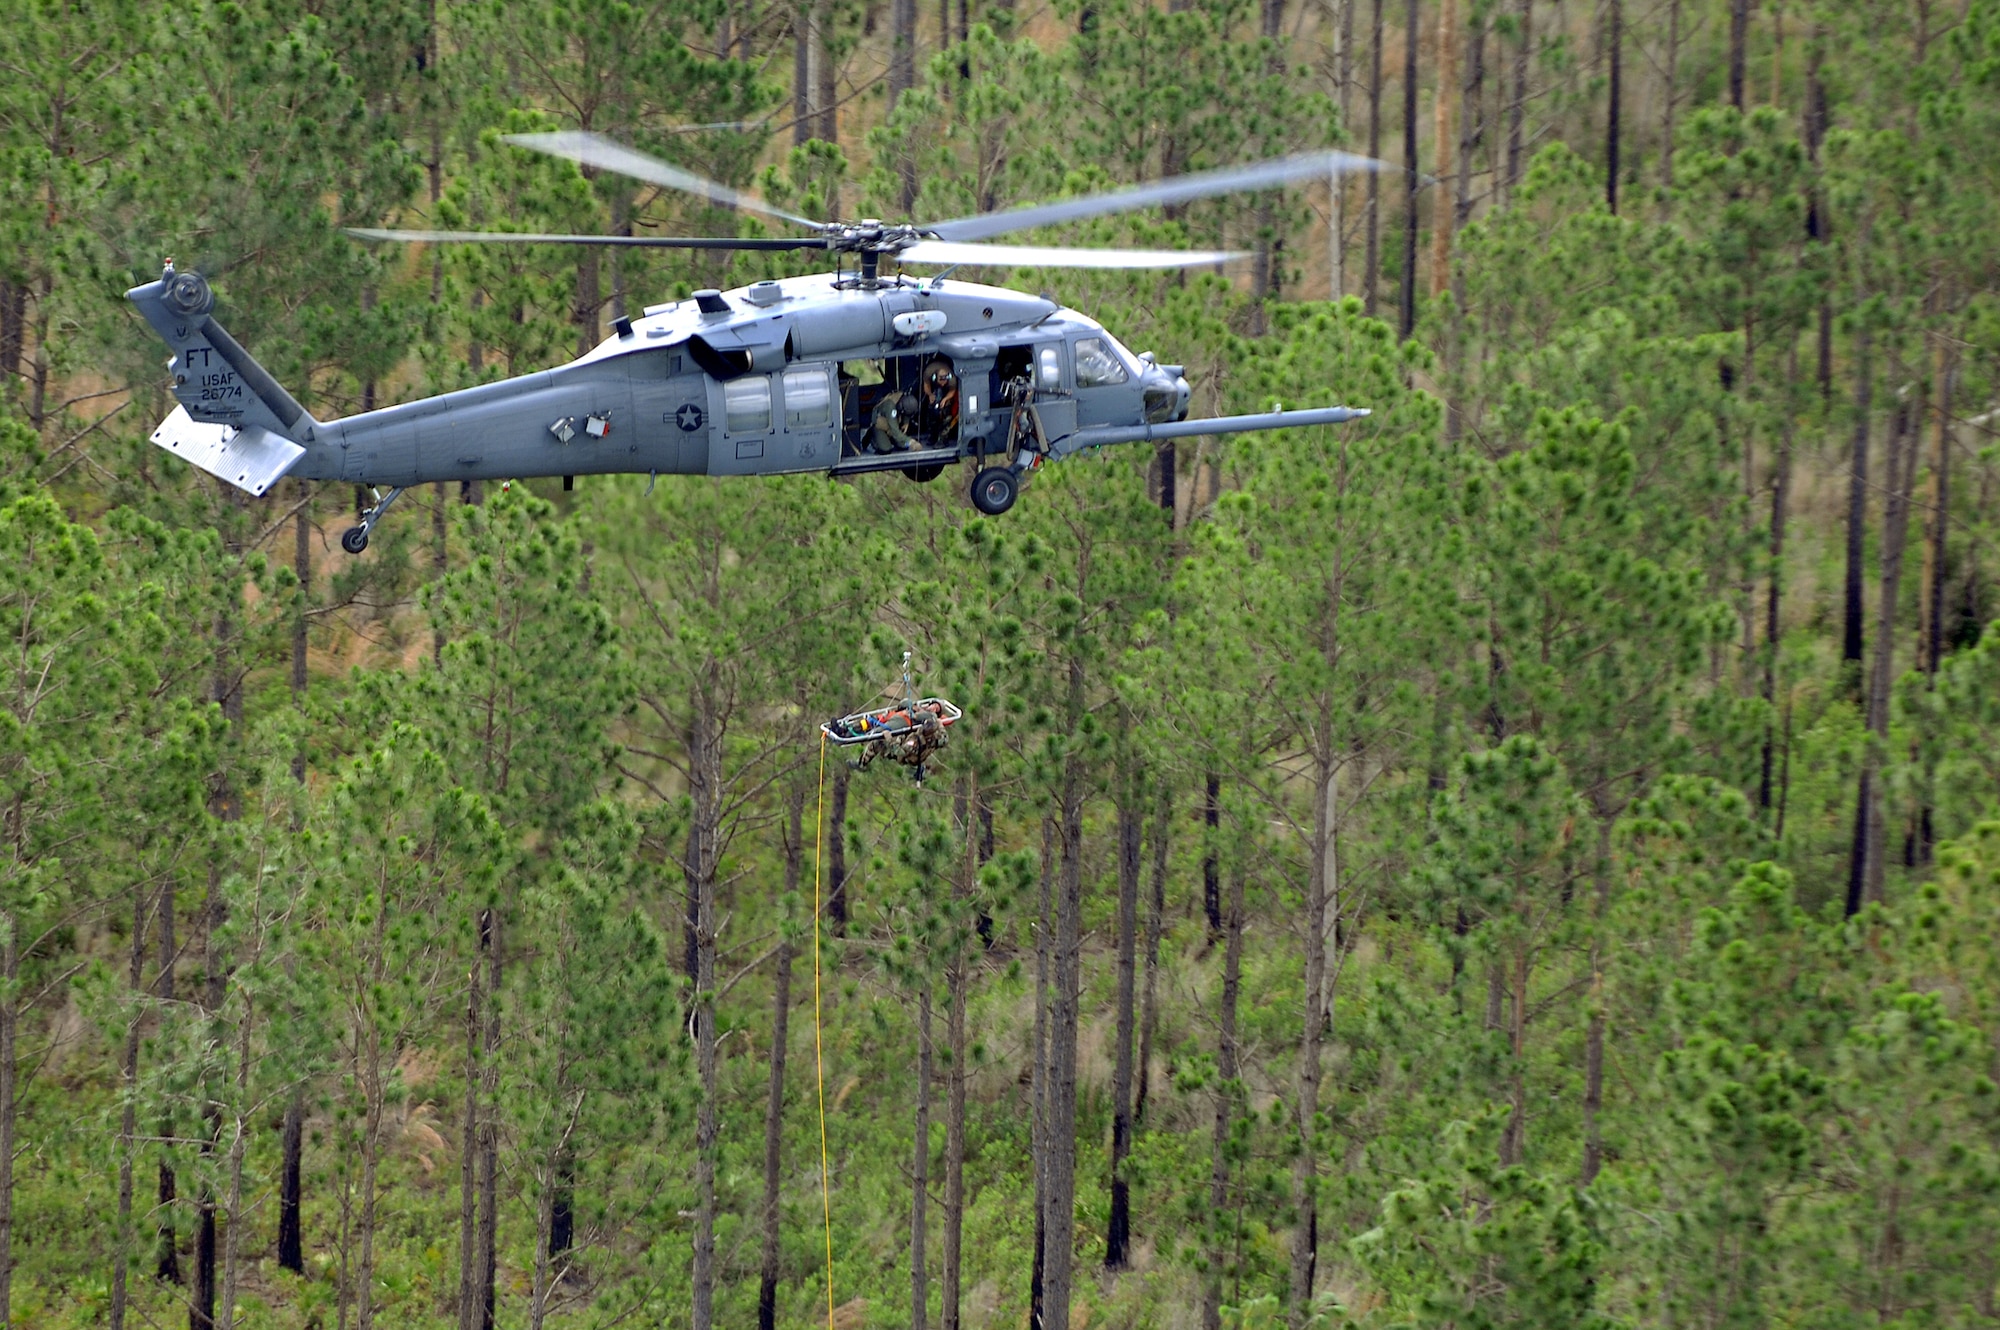 An HH-60G Pave Hawk from the 41st Rescue Squadron, Moody Air Force Base Ga, hoists a patient and para-rescueman, June 27 over Moody's Grand Bay Range. A video production company visited Moody, to film an advertisment for the U.S. Air Force recruiting campaign, "Do Something Amazing." (U.S. Air Force photo by Master Sgt. Scott Reed) 